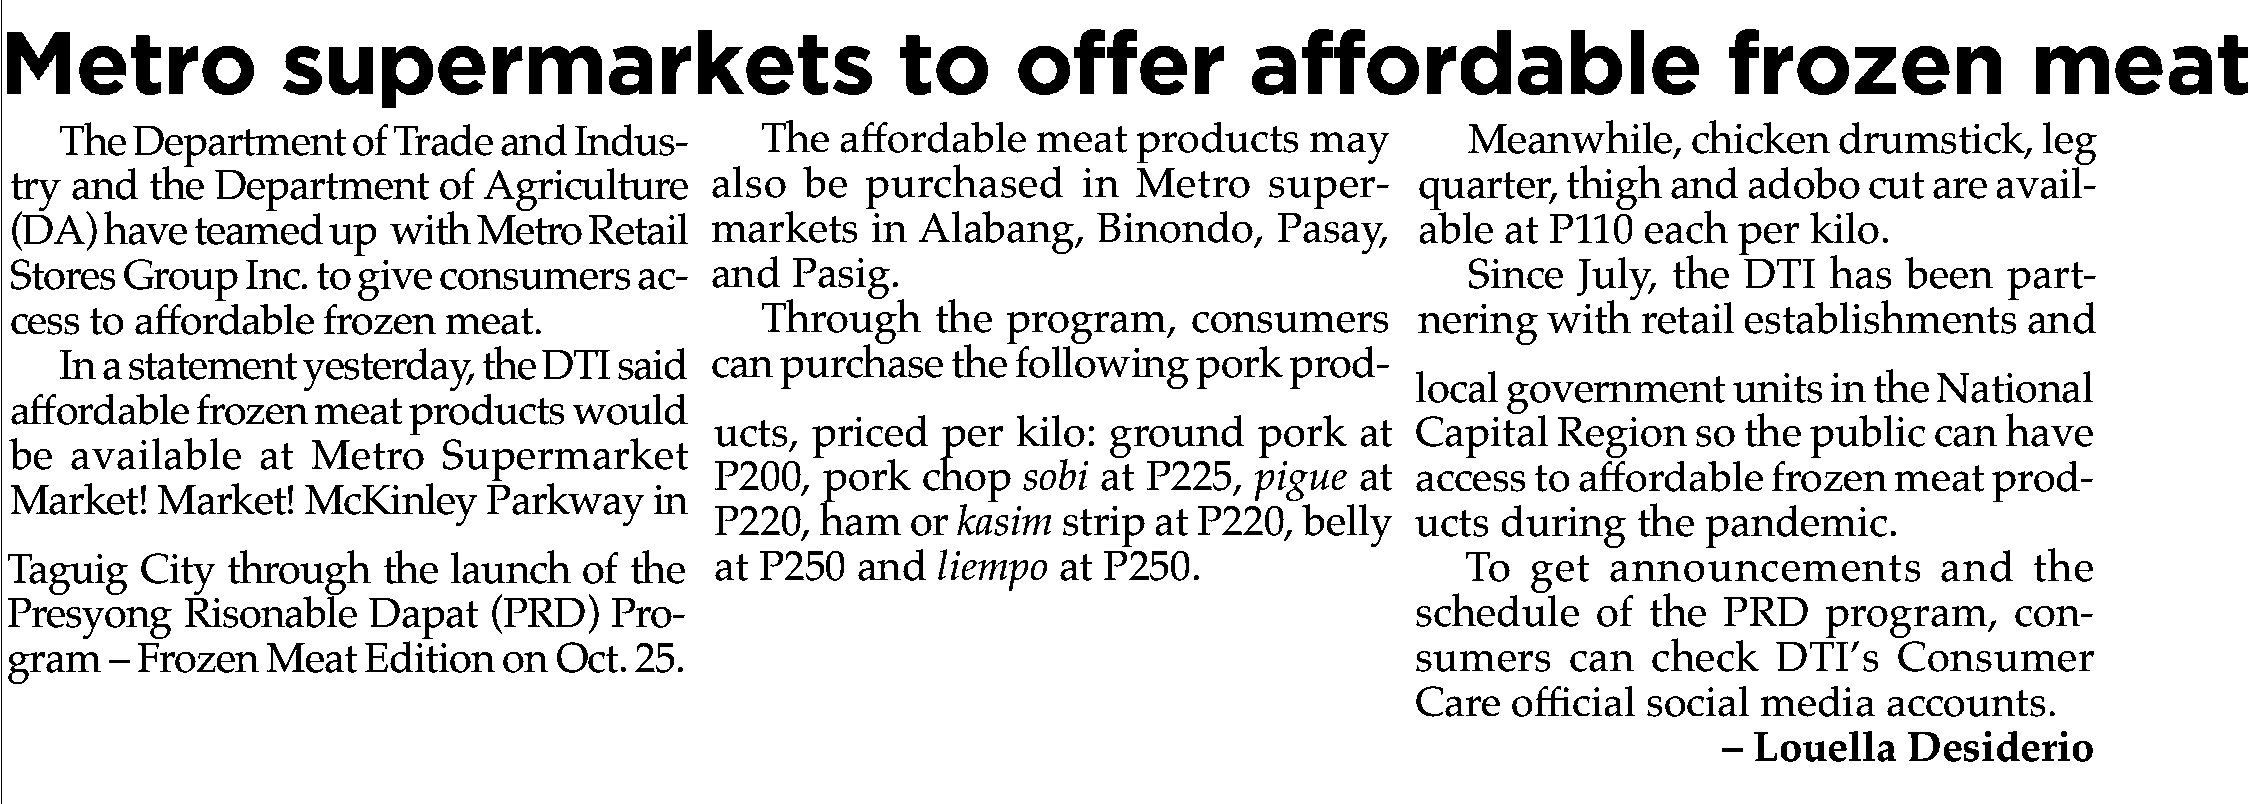 Oct 23 Metro supermarkets to offer affordable frozen meat The Philippine Star